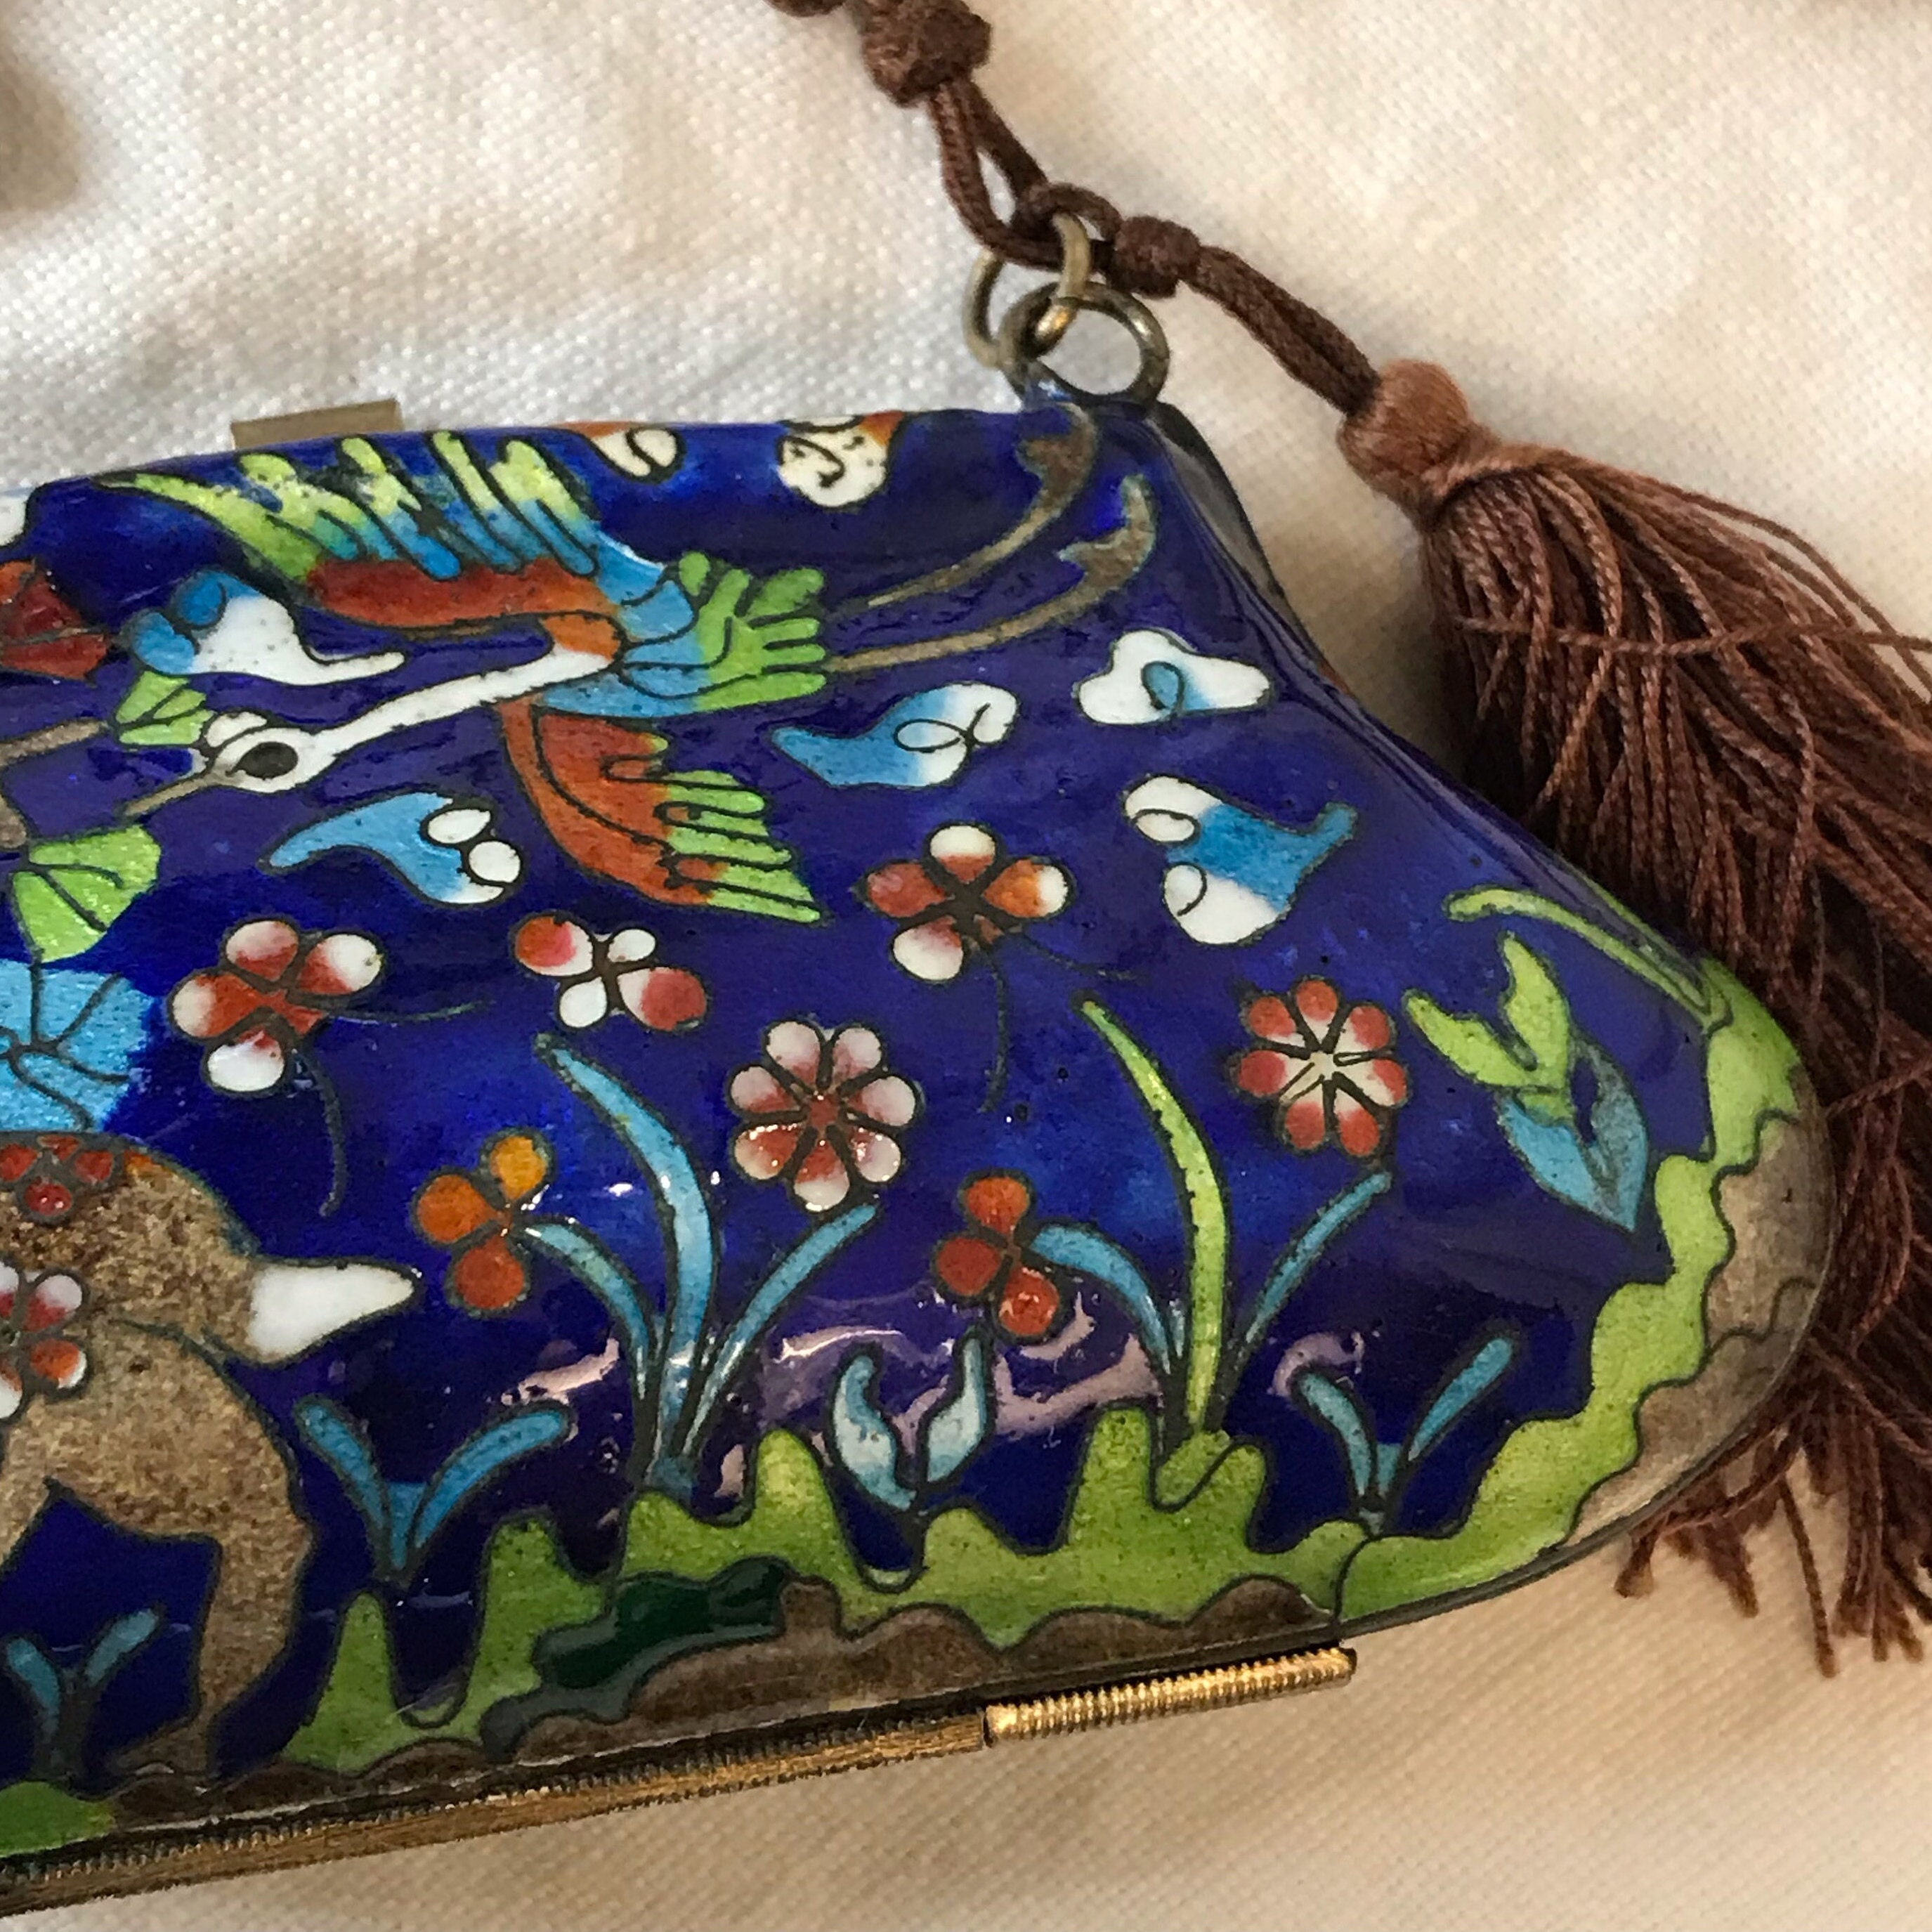 Cloisonne and Enamel Purse, Vintage Import with The Prettiest Deer Design, Early 20th C, in Excellent Condition